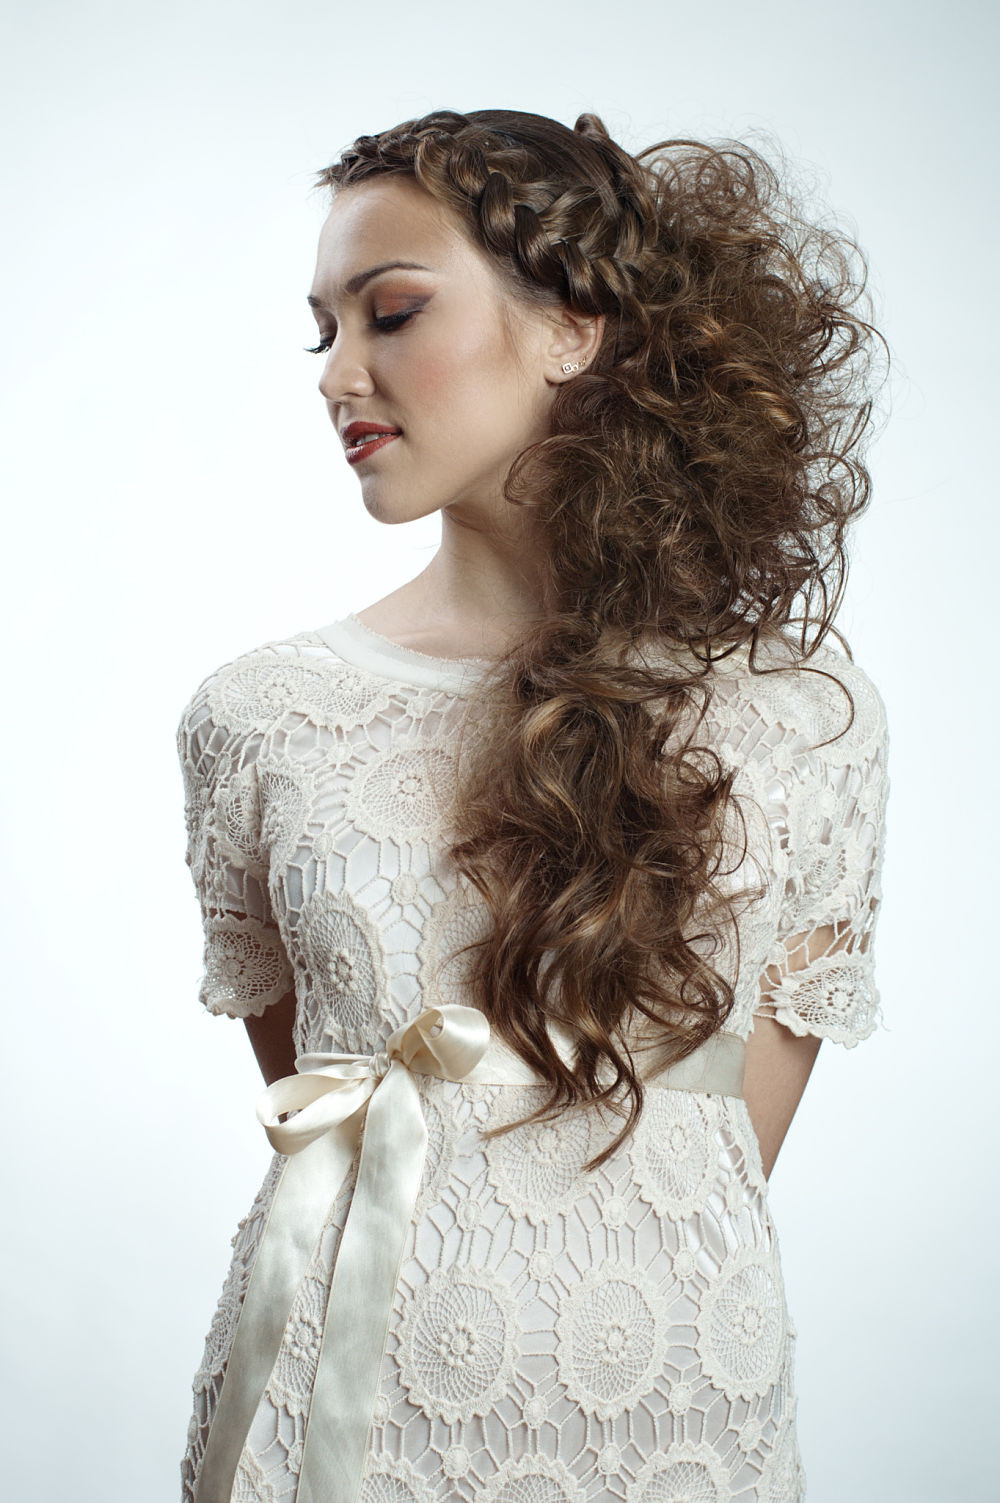 DIY Hairstyles For Curly Hair
 Let’s Turn Some Heads DIY Prom Hairstyle ´Dos For Curly